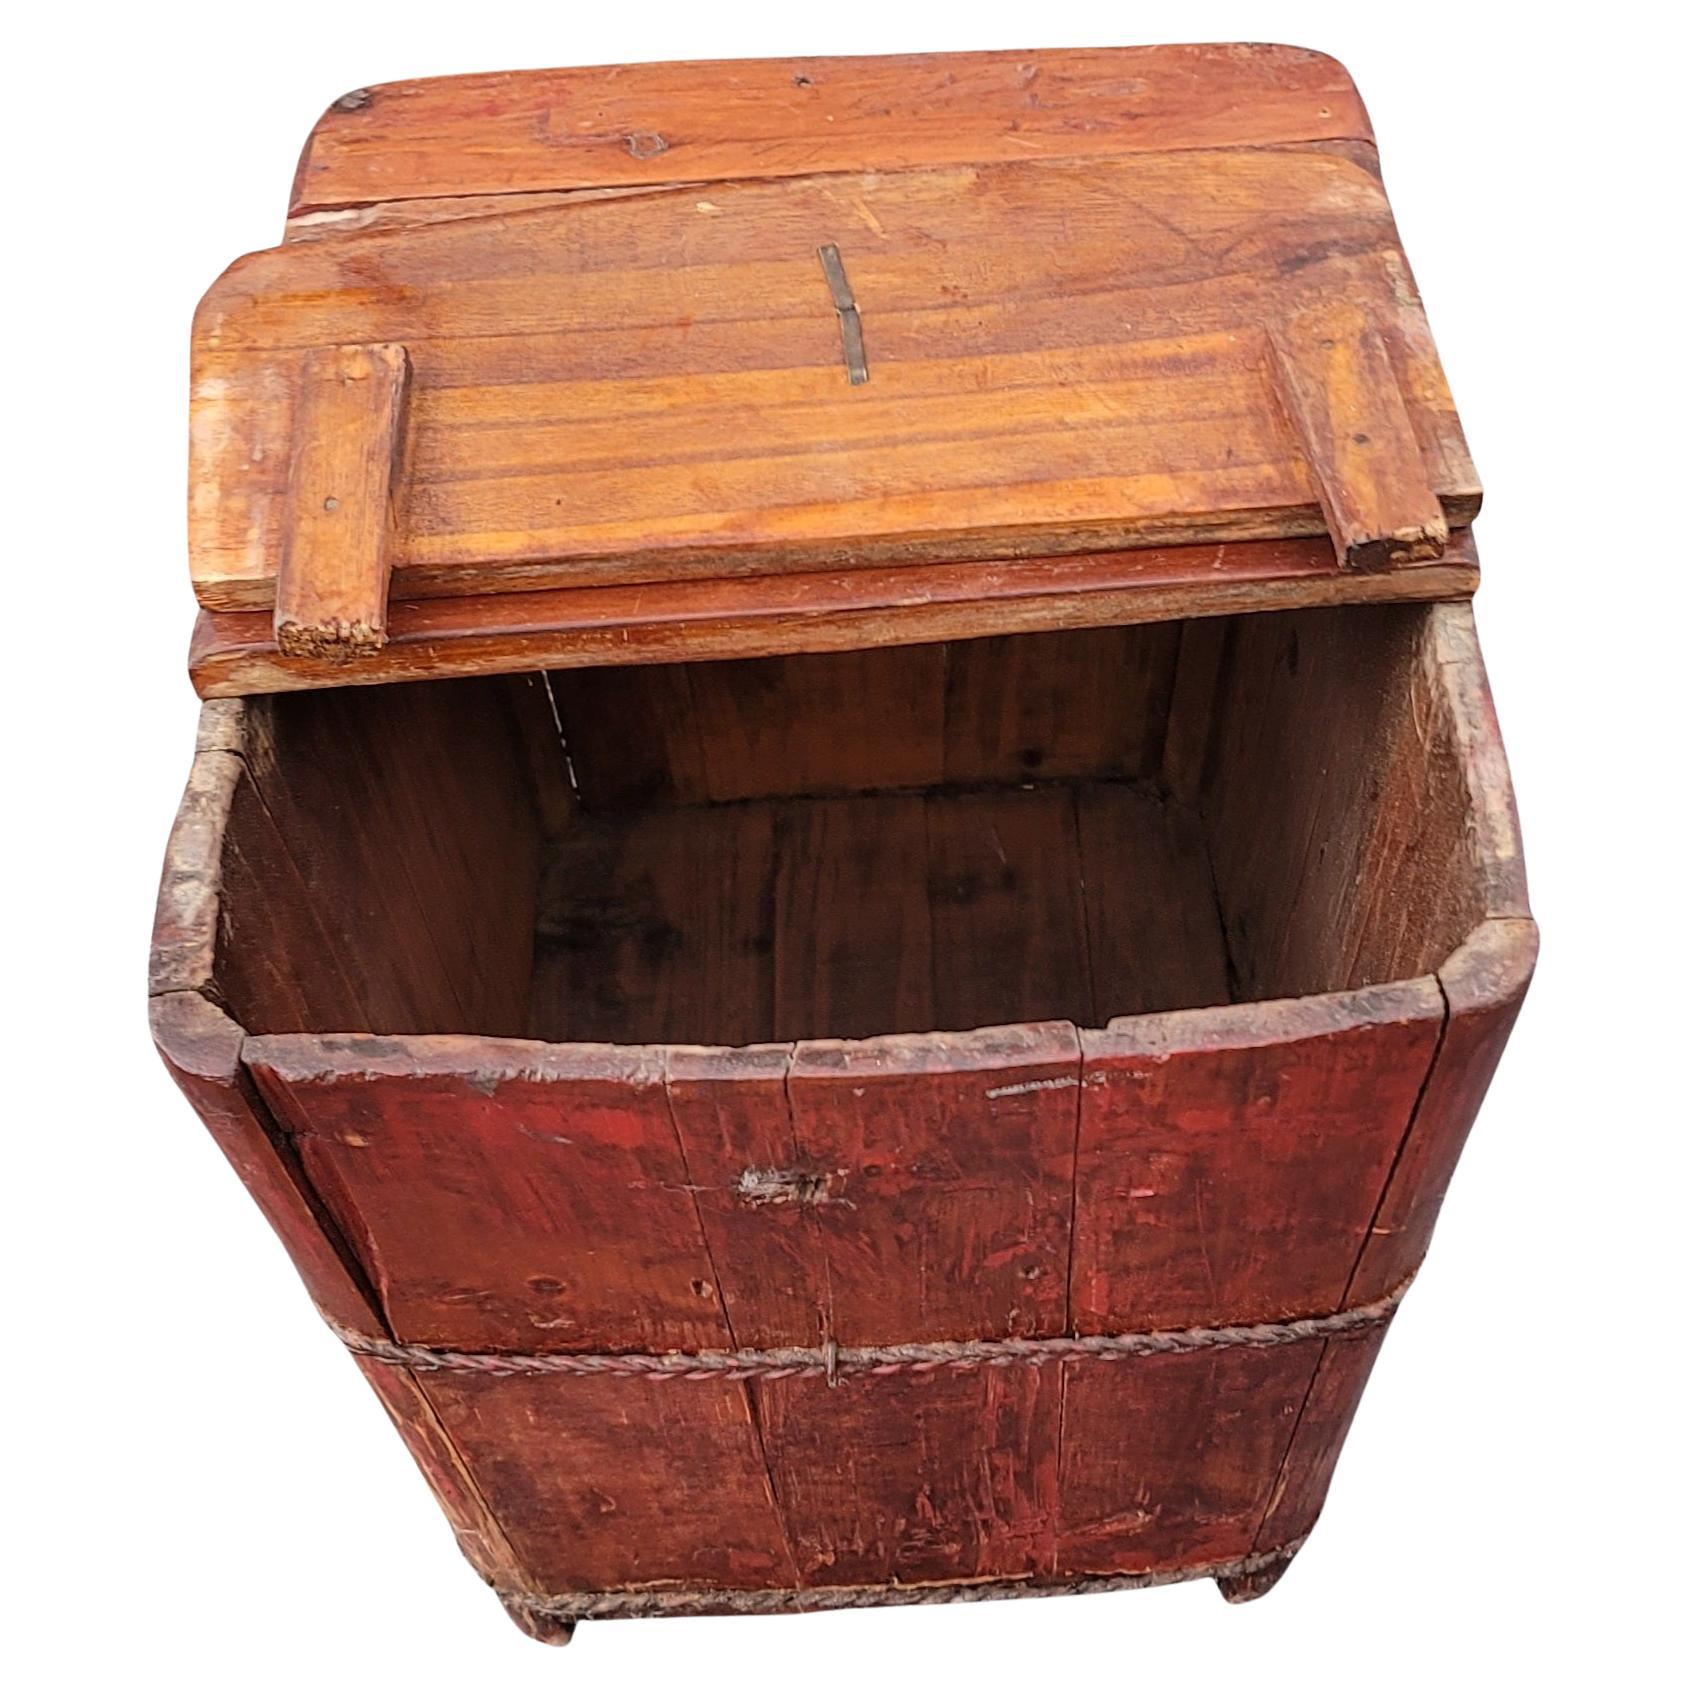 Mid 19th Century Asian Wooden decorative storage box with lid.
Measures 13.5